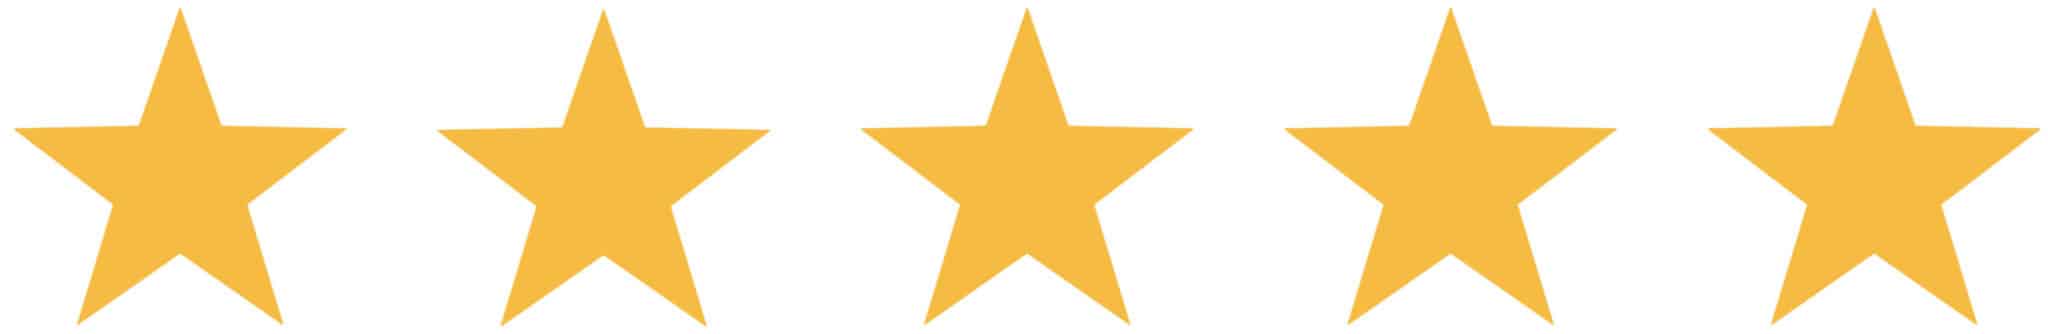 5-star rating logo for appliance repairs in Stark County, Ohio.